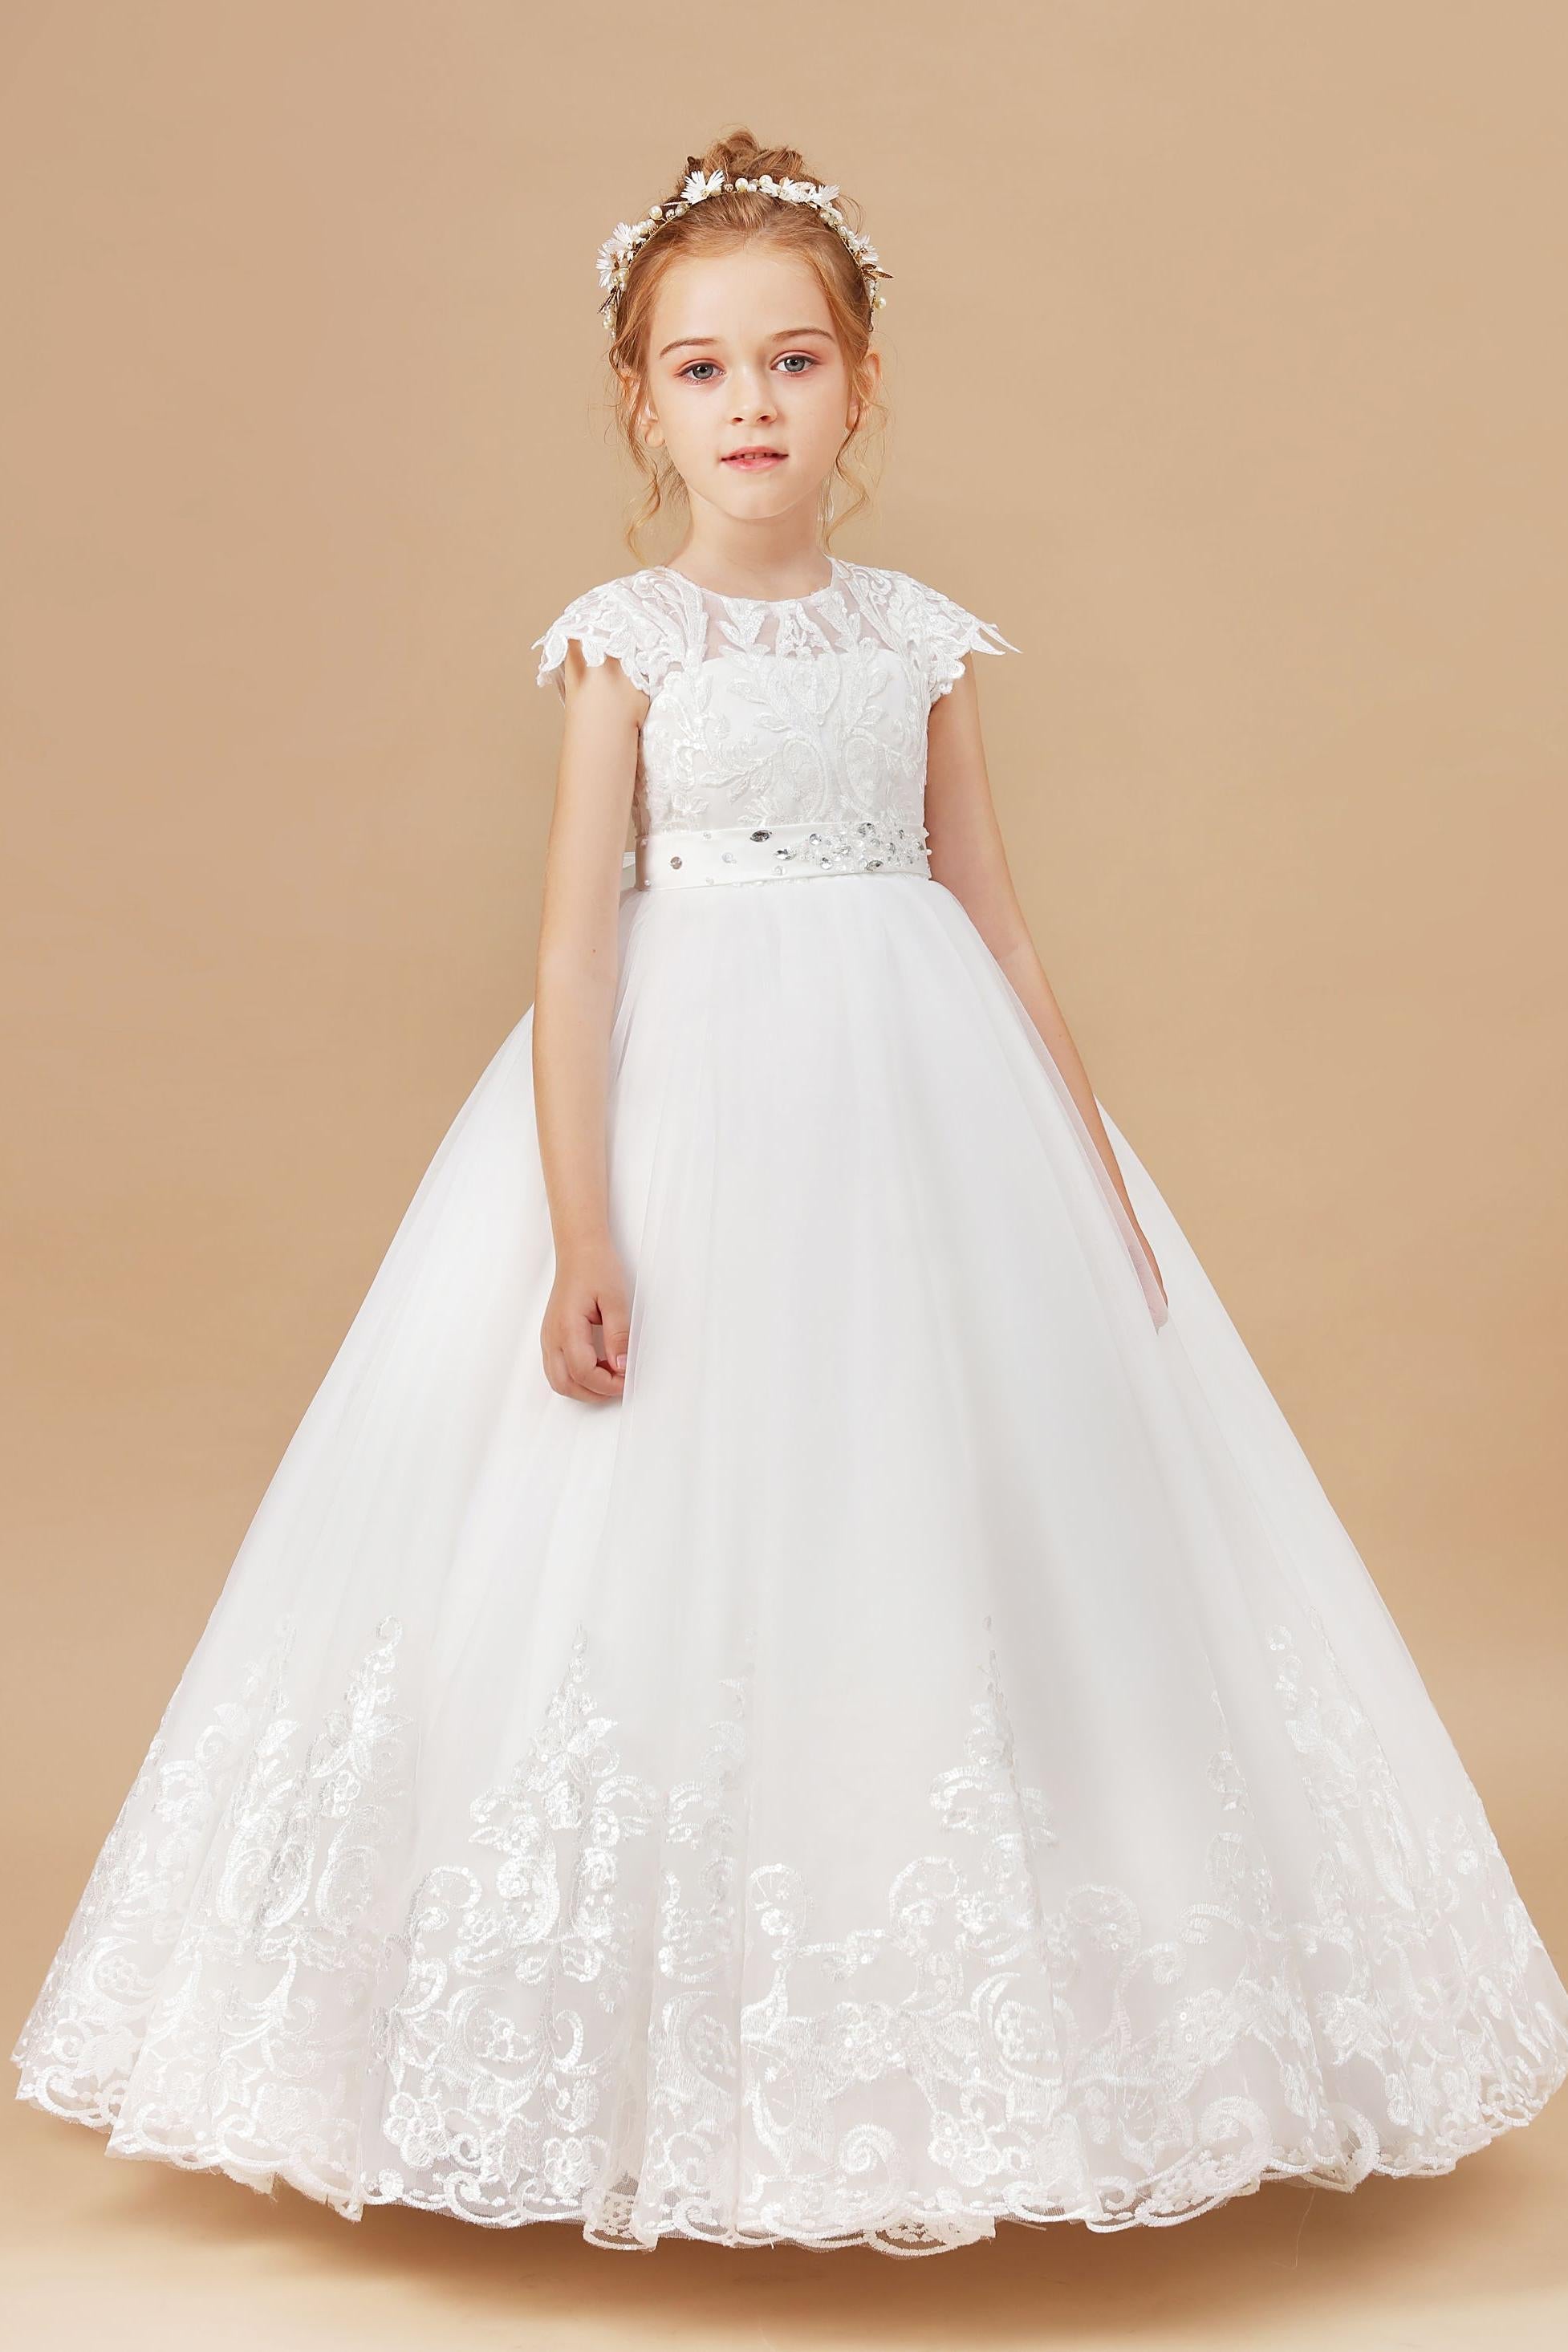 Ivory  Lace Satin Princess Dress Flower Girl Dress With Bowknot